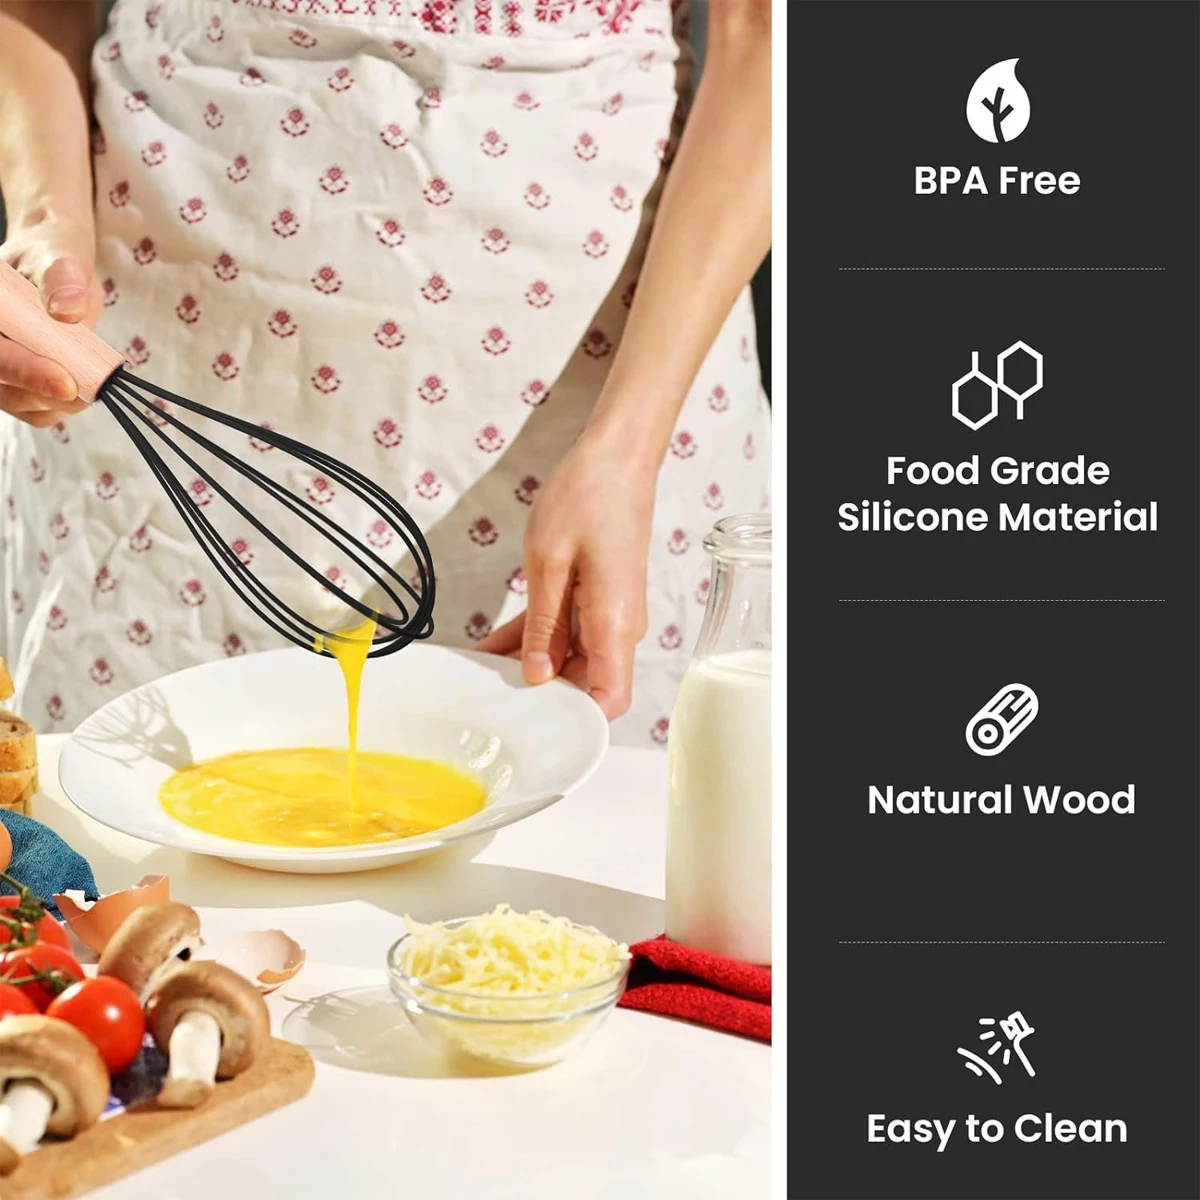 https://ae01.alicdn.com/kf/Sfbc0830d49f847d89644f70f2177a3a6D/Leeseph-Silicone-Whisk-with-Wooden-Handle-Egg-Beater-for-Blending-Whisking-Beating-Stirring-Cooking-Baking-Kitchen.jpg